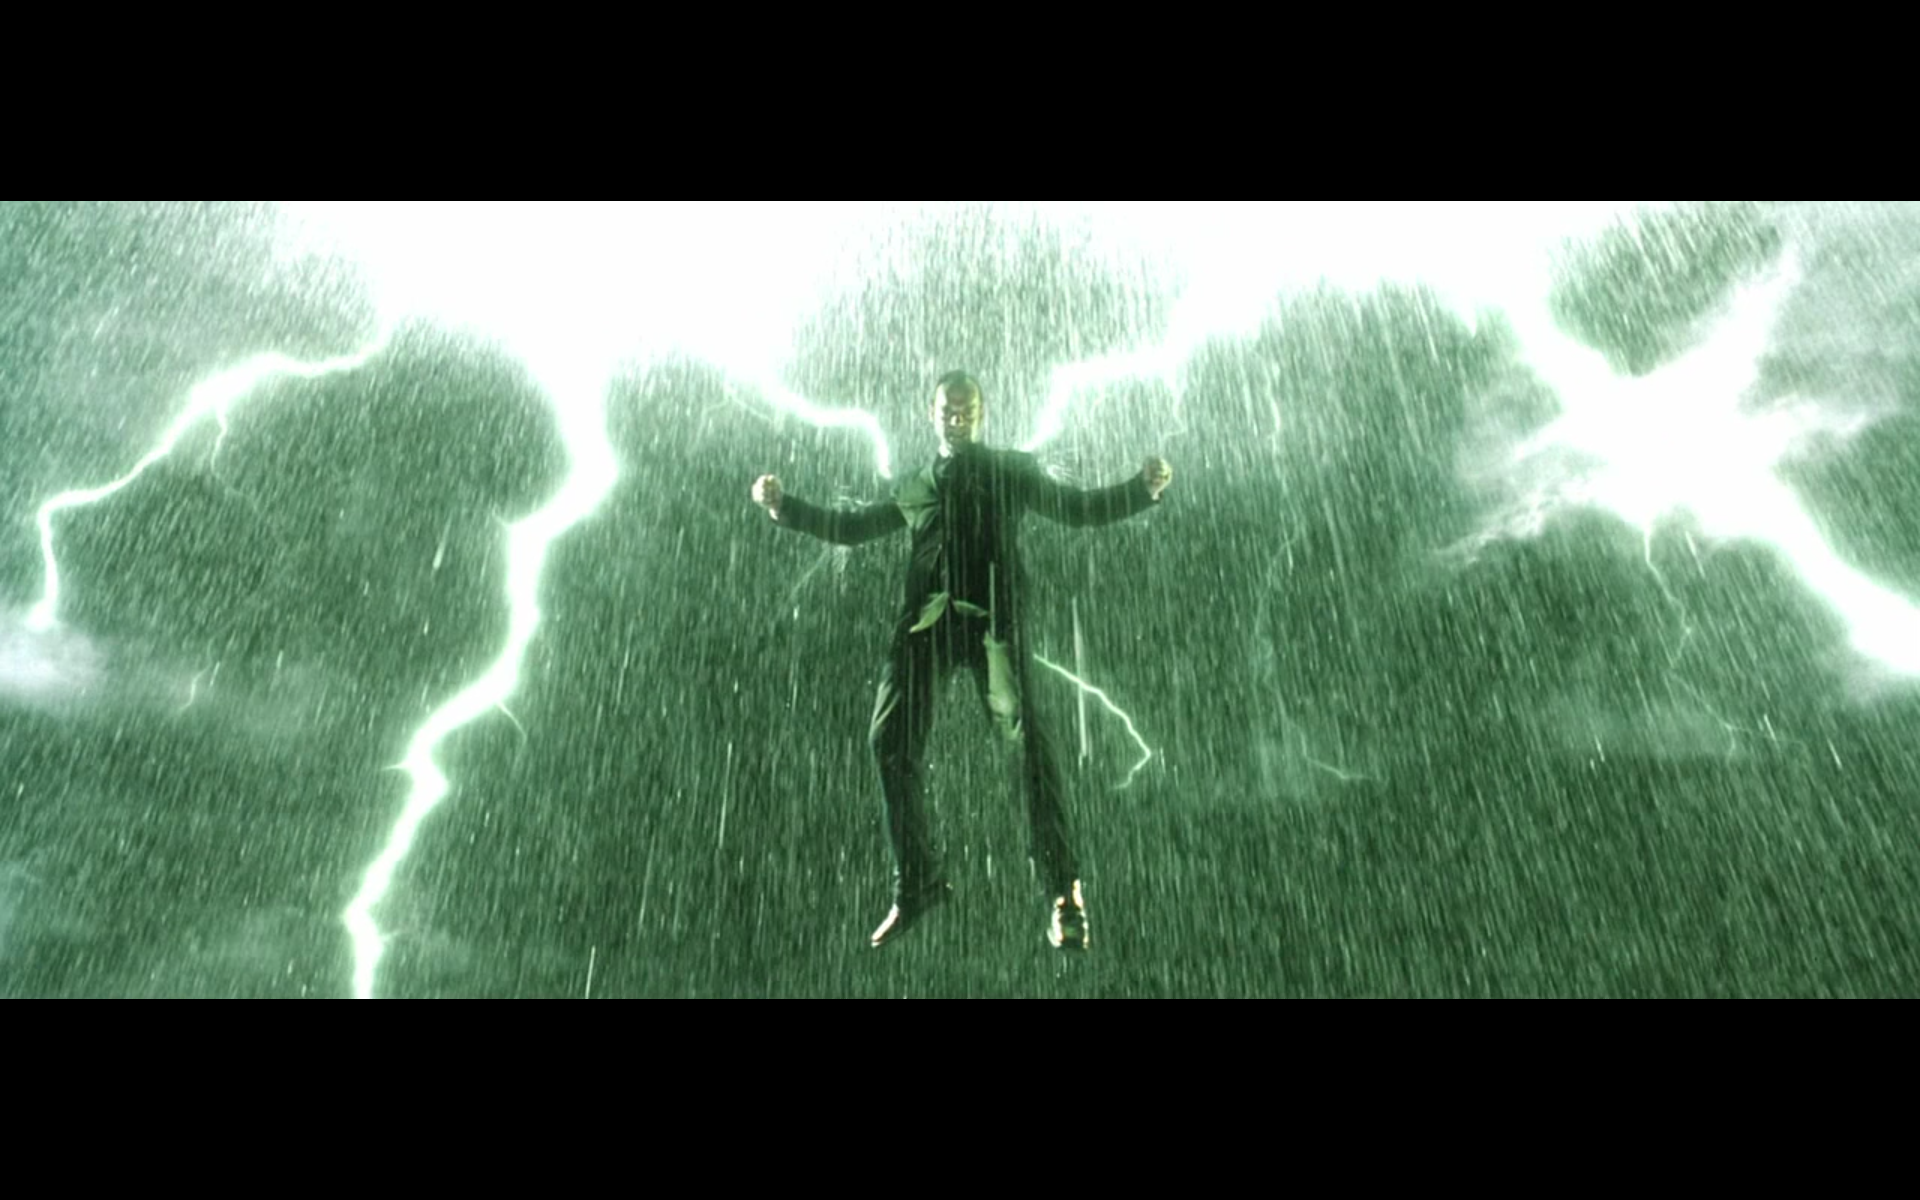 In The Matrix Revolutions (2003), The Lighting In The Neo Smith Fight Resembles The Wings Of A Devil Growing Out Of Smith. With An Idea Of The Film Being That Neo Is Jesus